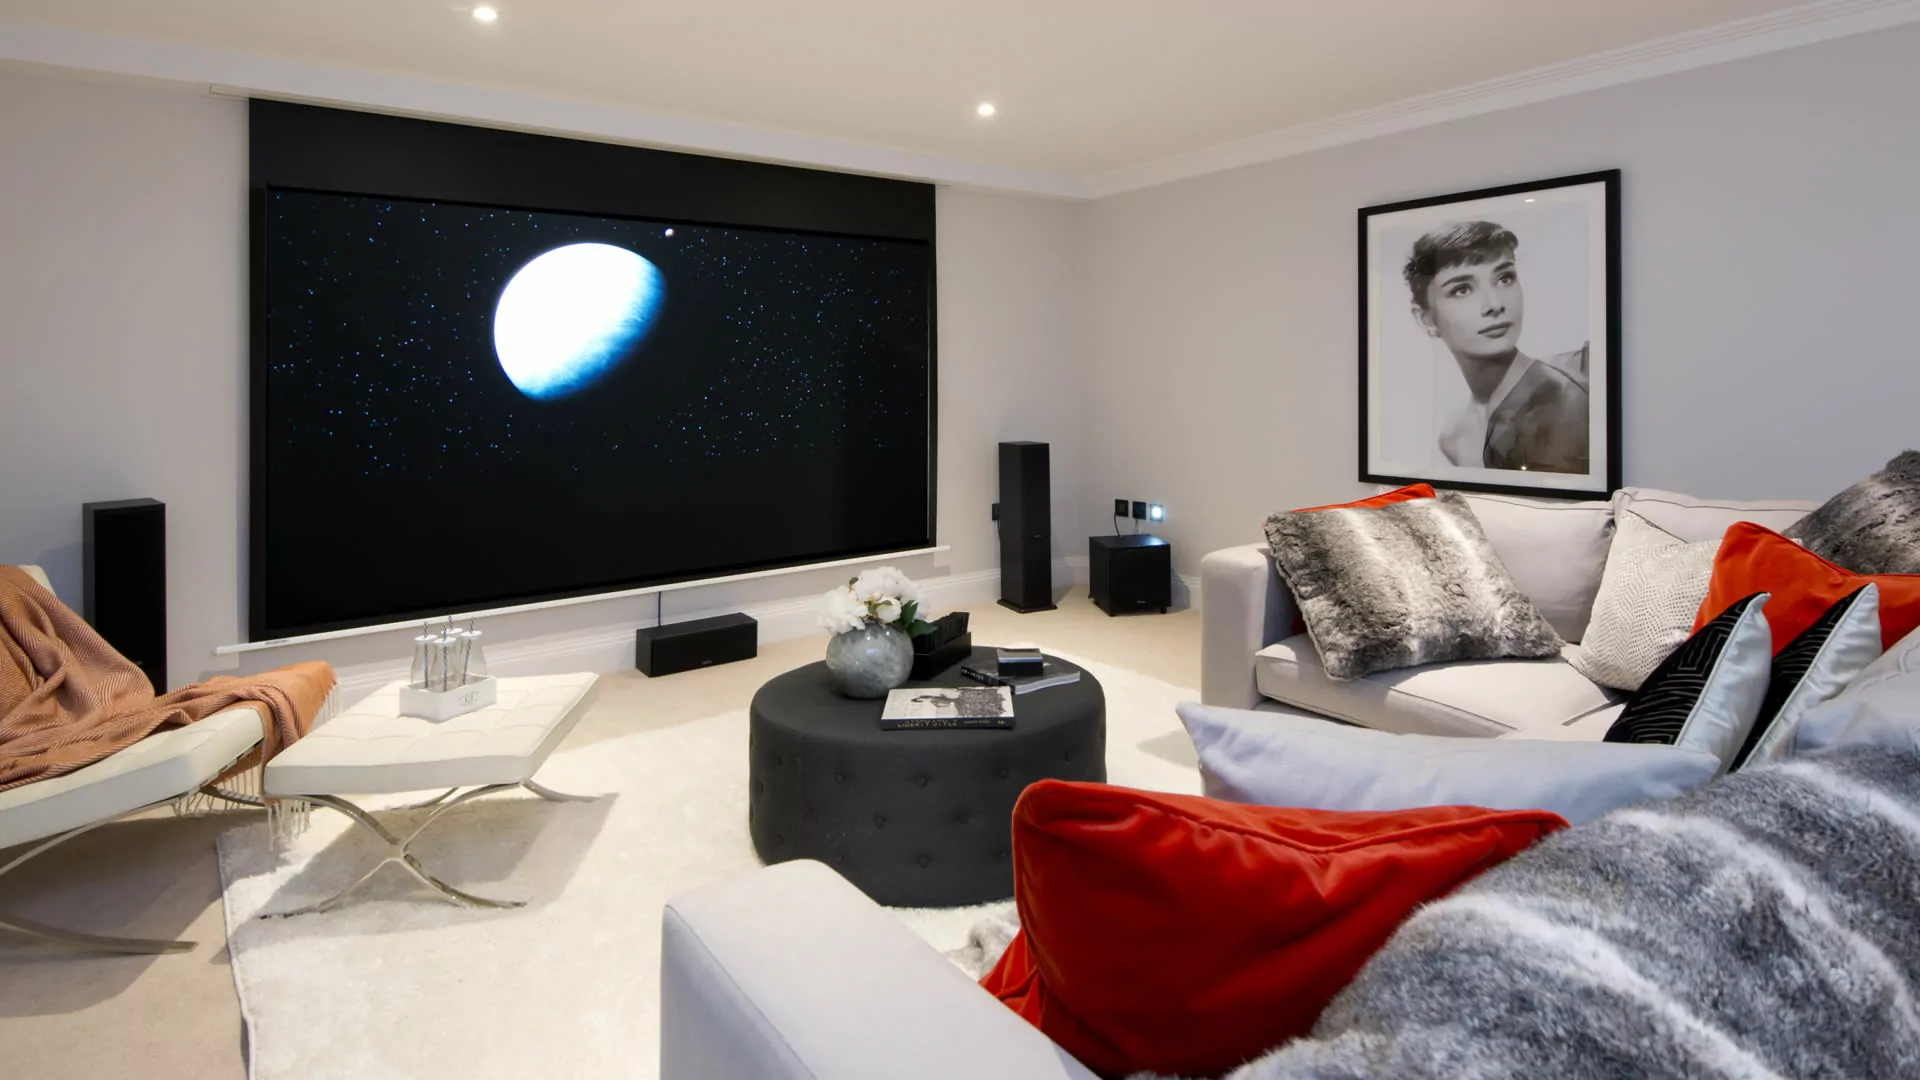 Gables Park plot 1 cinema room, with a large sofa and projector screen.